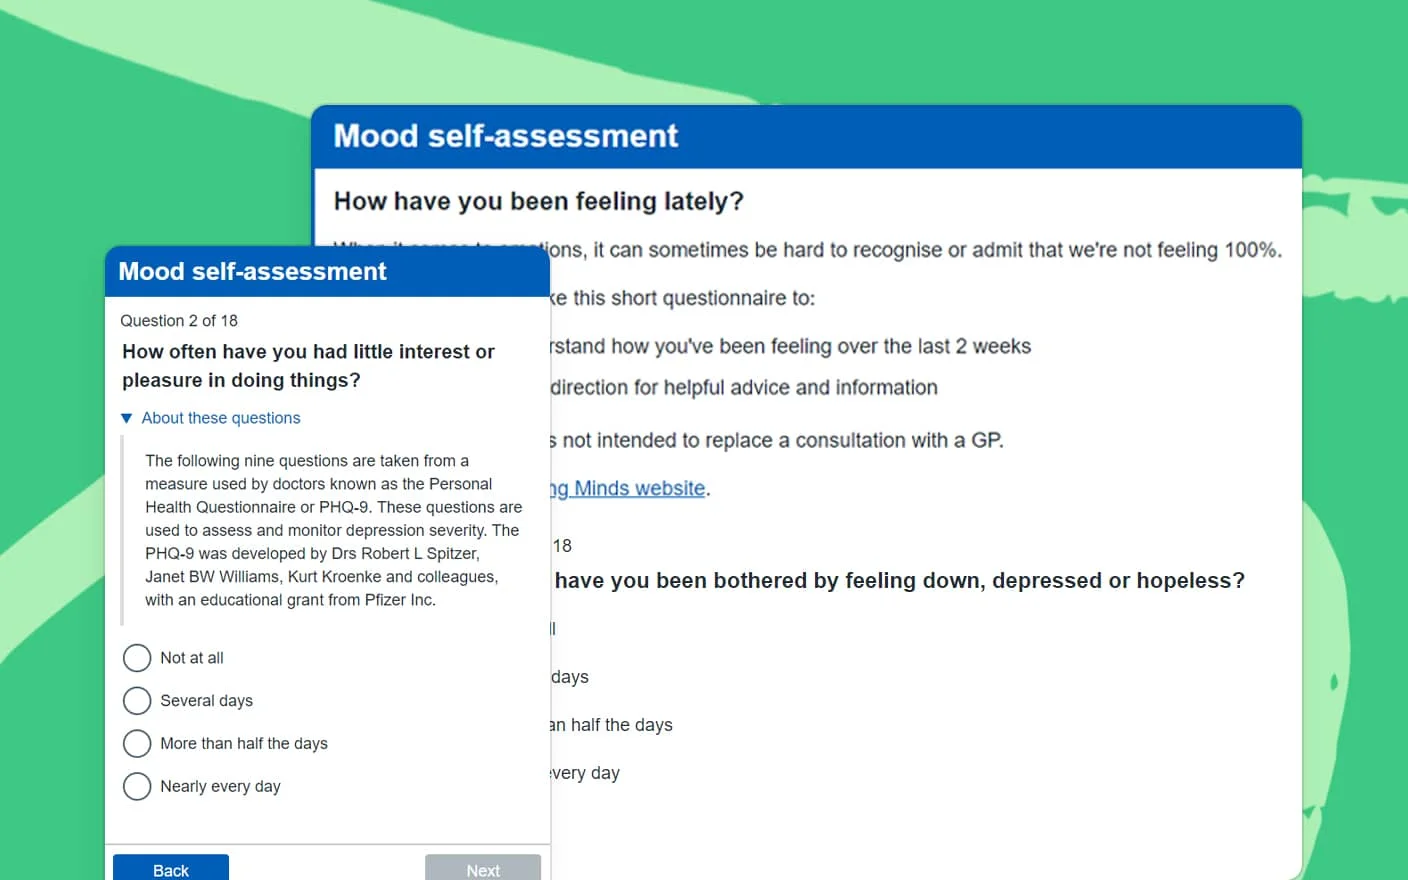 Mood self-assessment questionnaire on a web interface, part of self-evaluation tools designed to help users identify their mental health needs